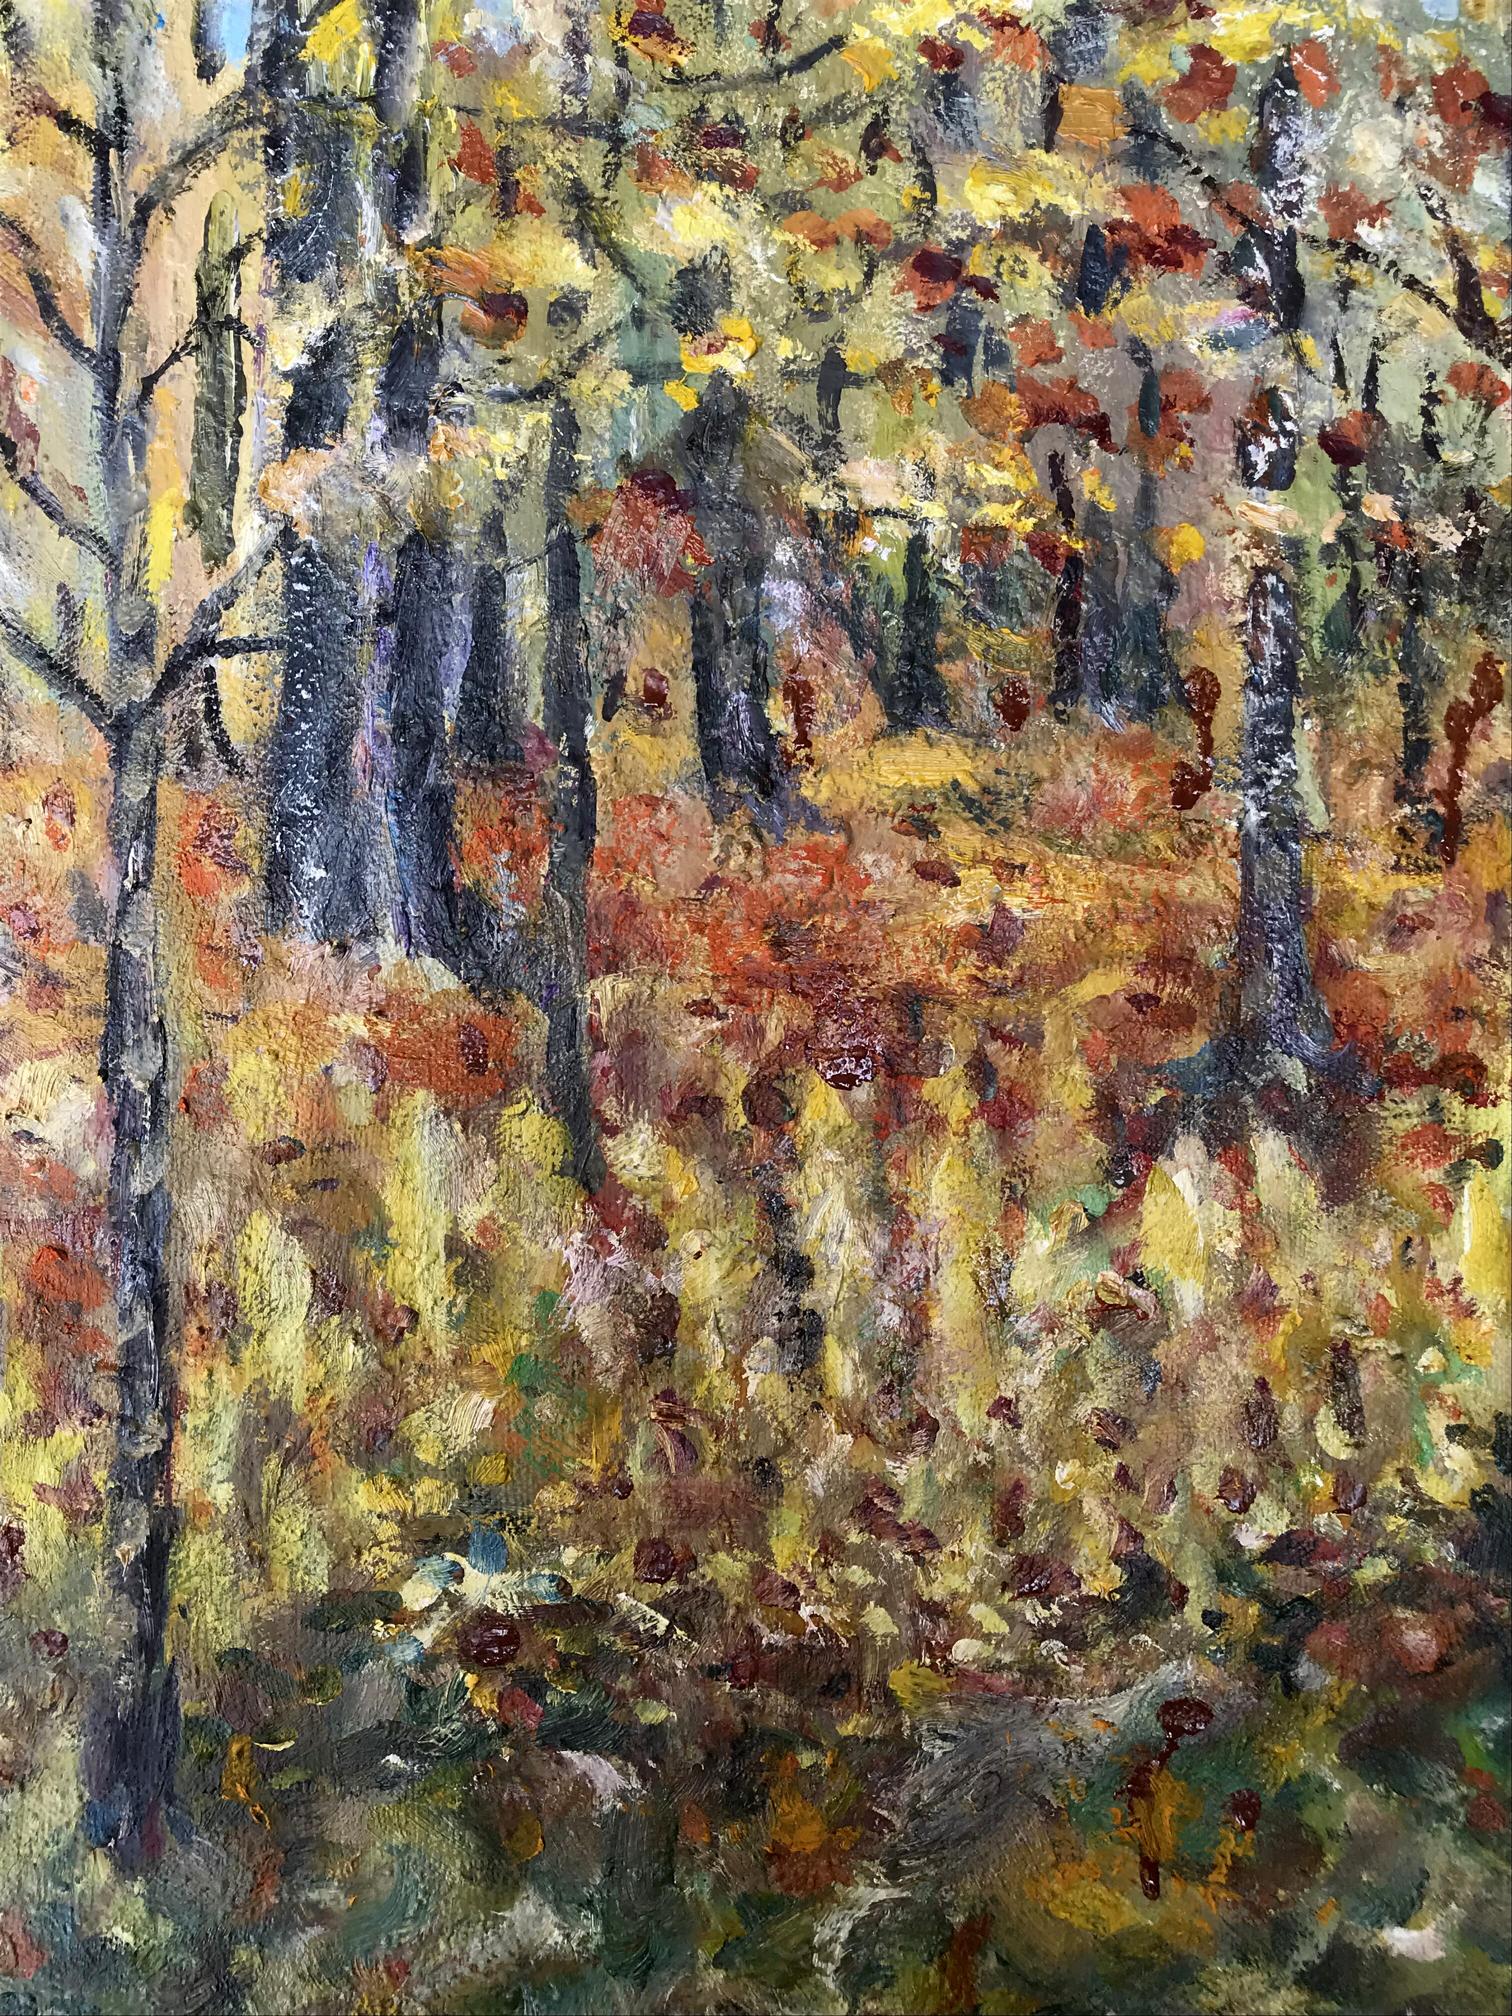 Shapoval Ivan Leontyevich's oil piece capturing the autumn theme with finesse